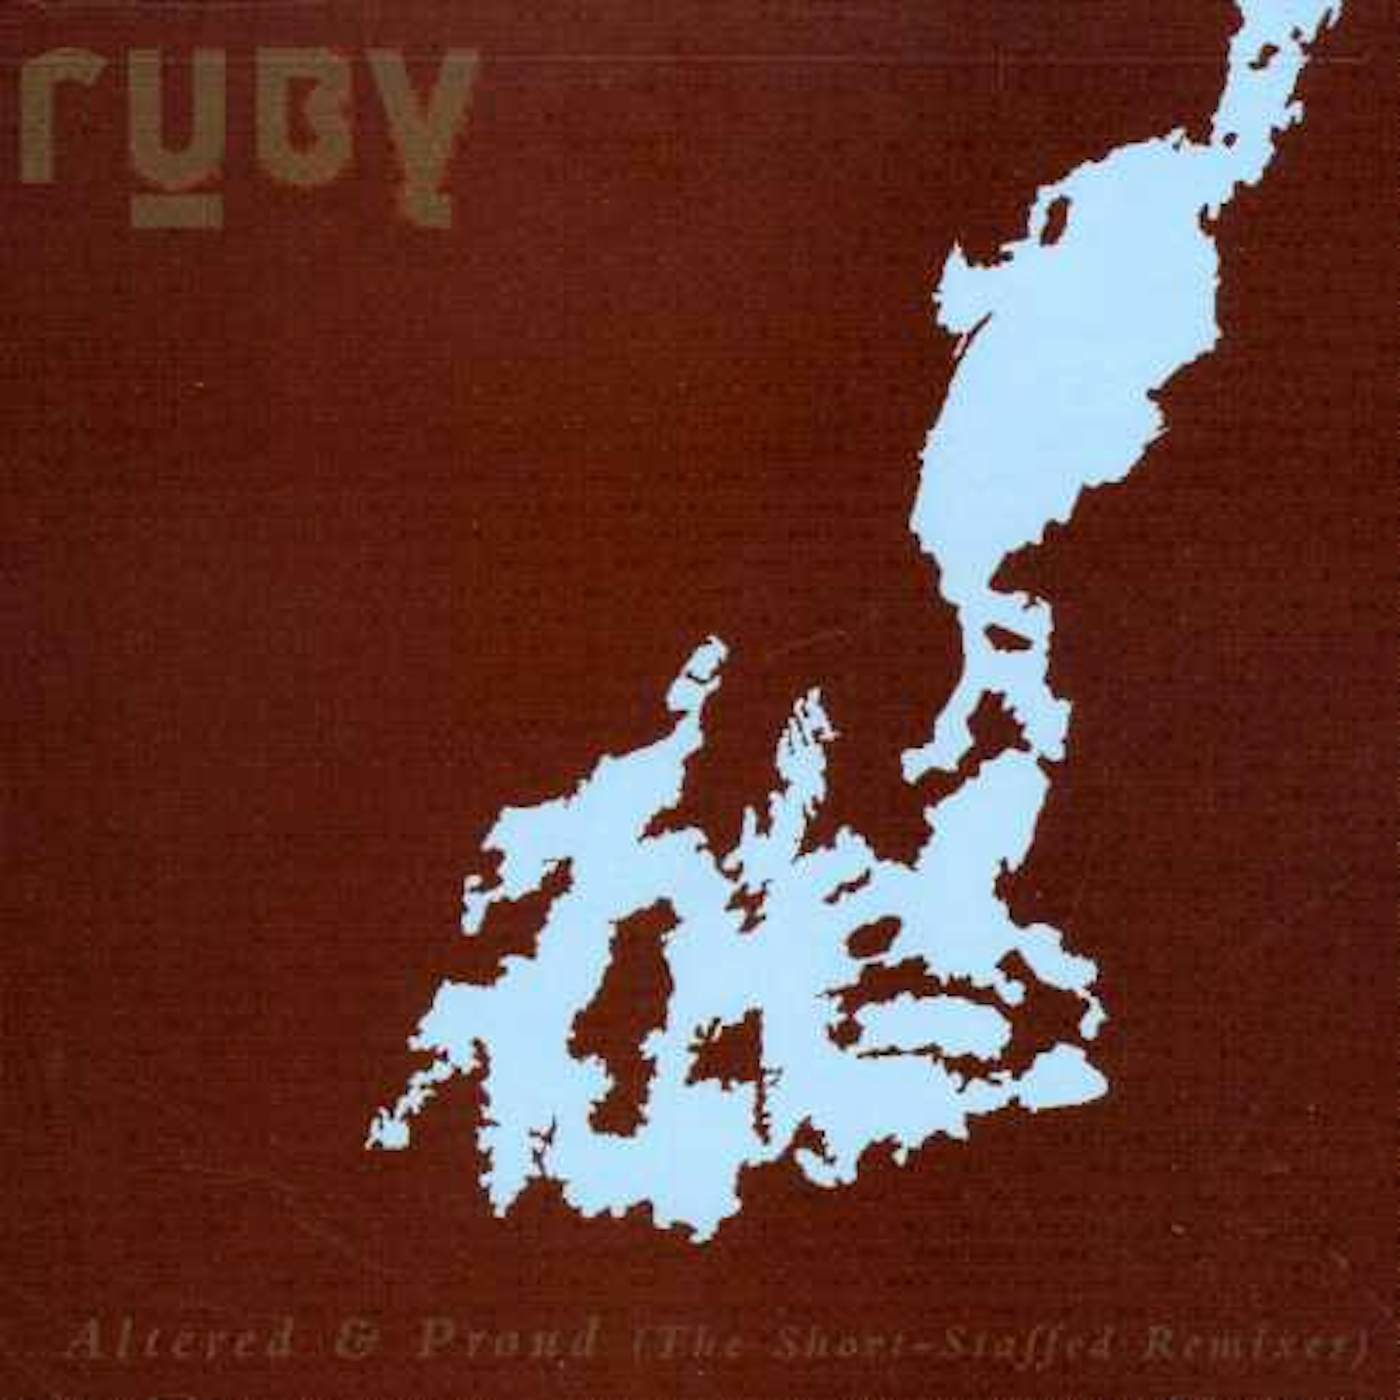 Ruby ALTERED & PROUD (SHORT-STAFFED REMIX) CD